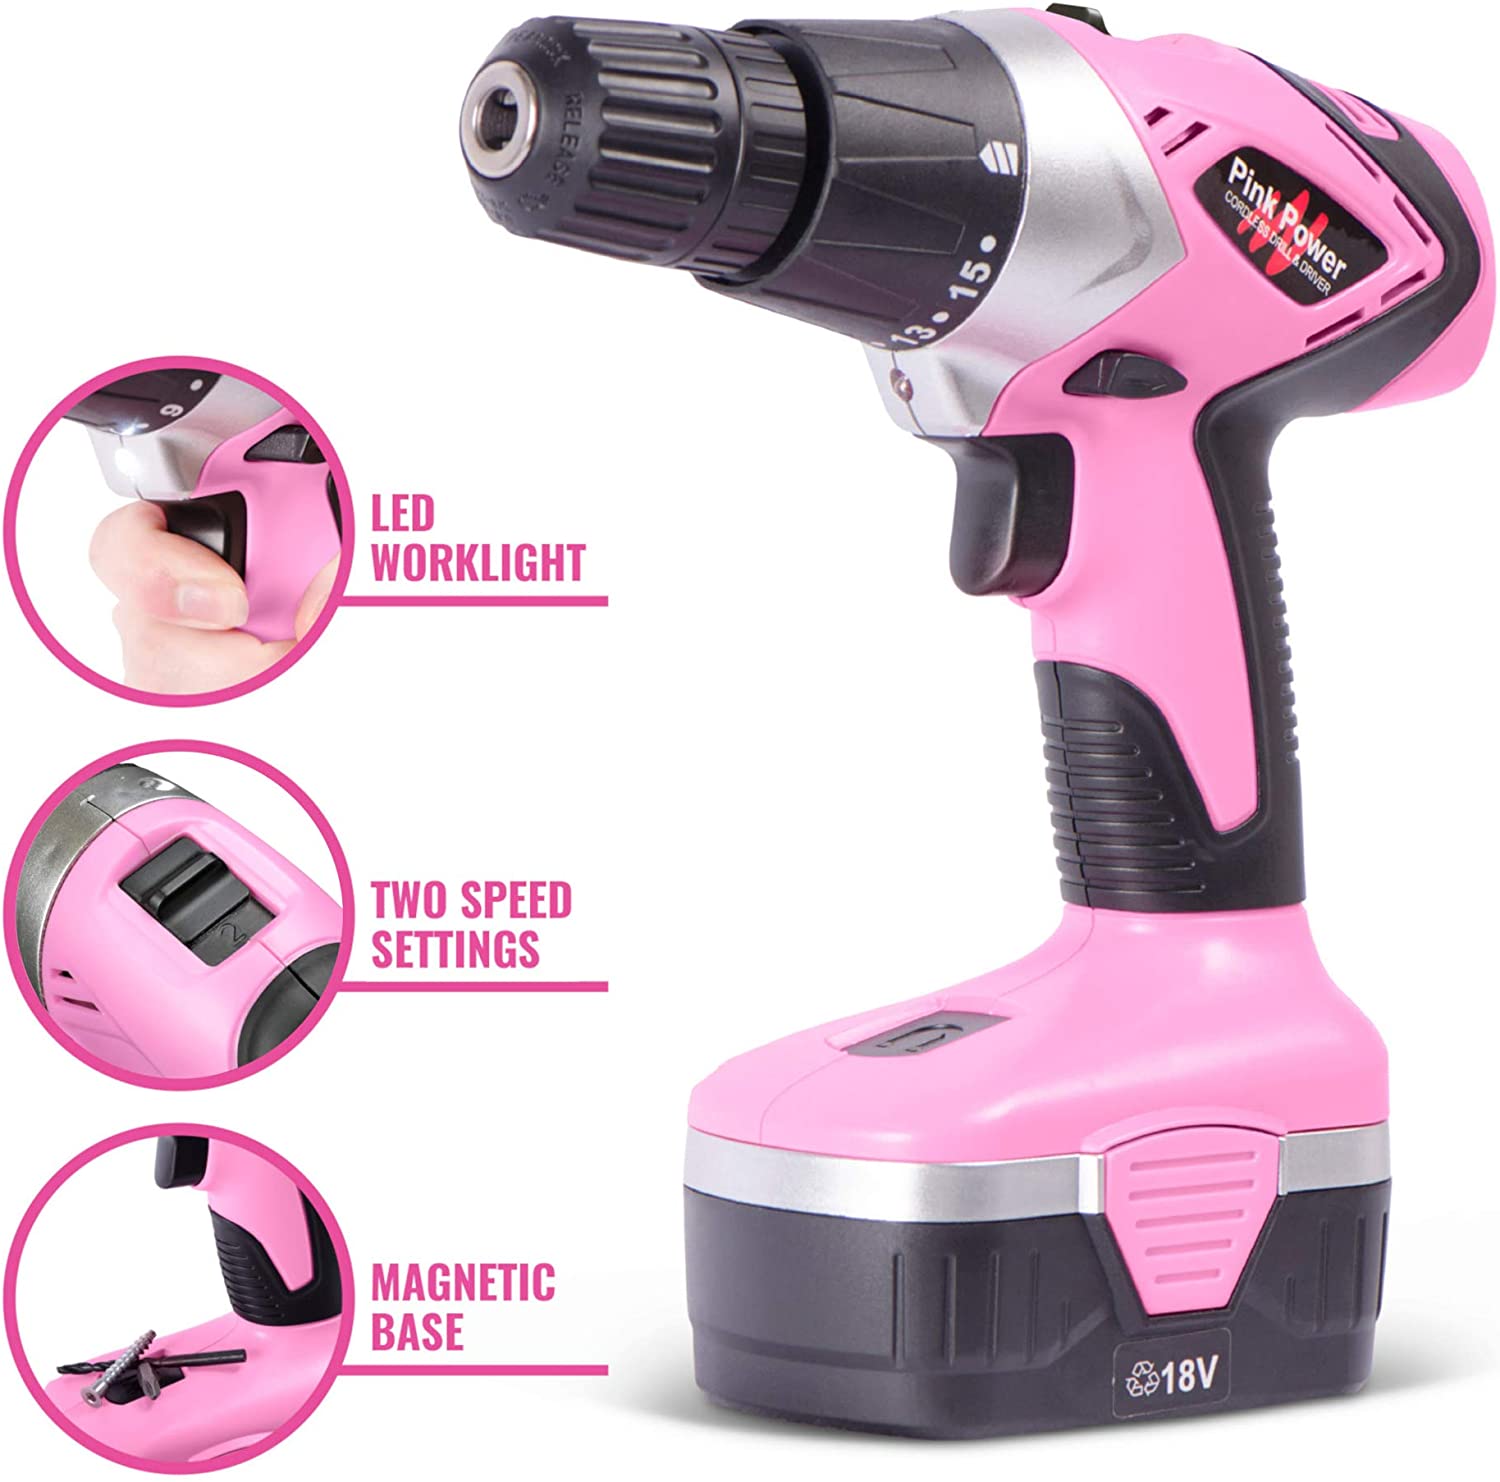 Pink Power Cordless Drill Set for Women - 18V Electric Drill Driver with Tool Case, Batteries, Charger & Drill Bit Set - image 4 of 6